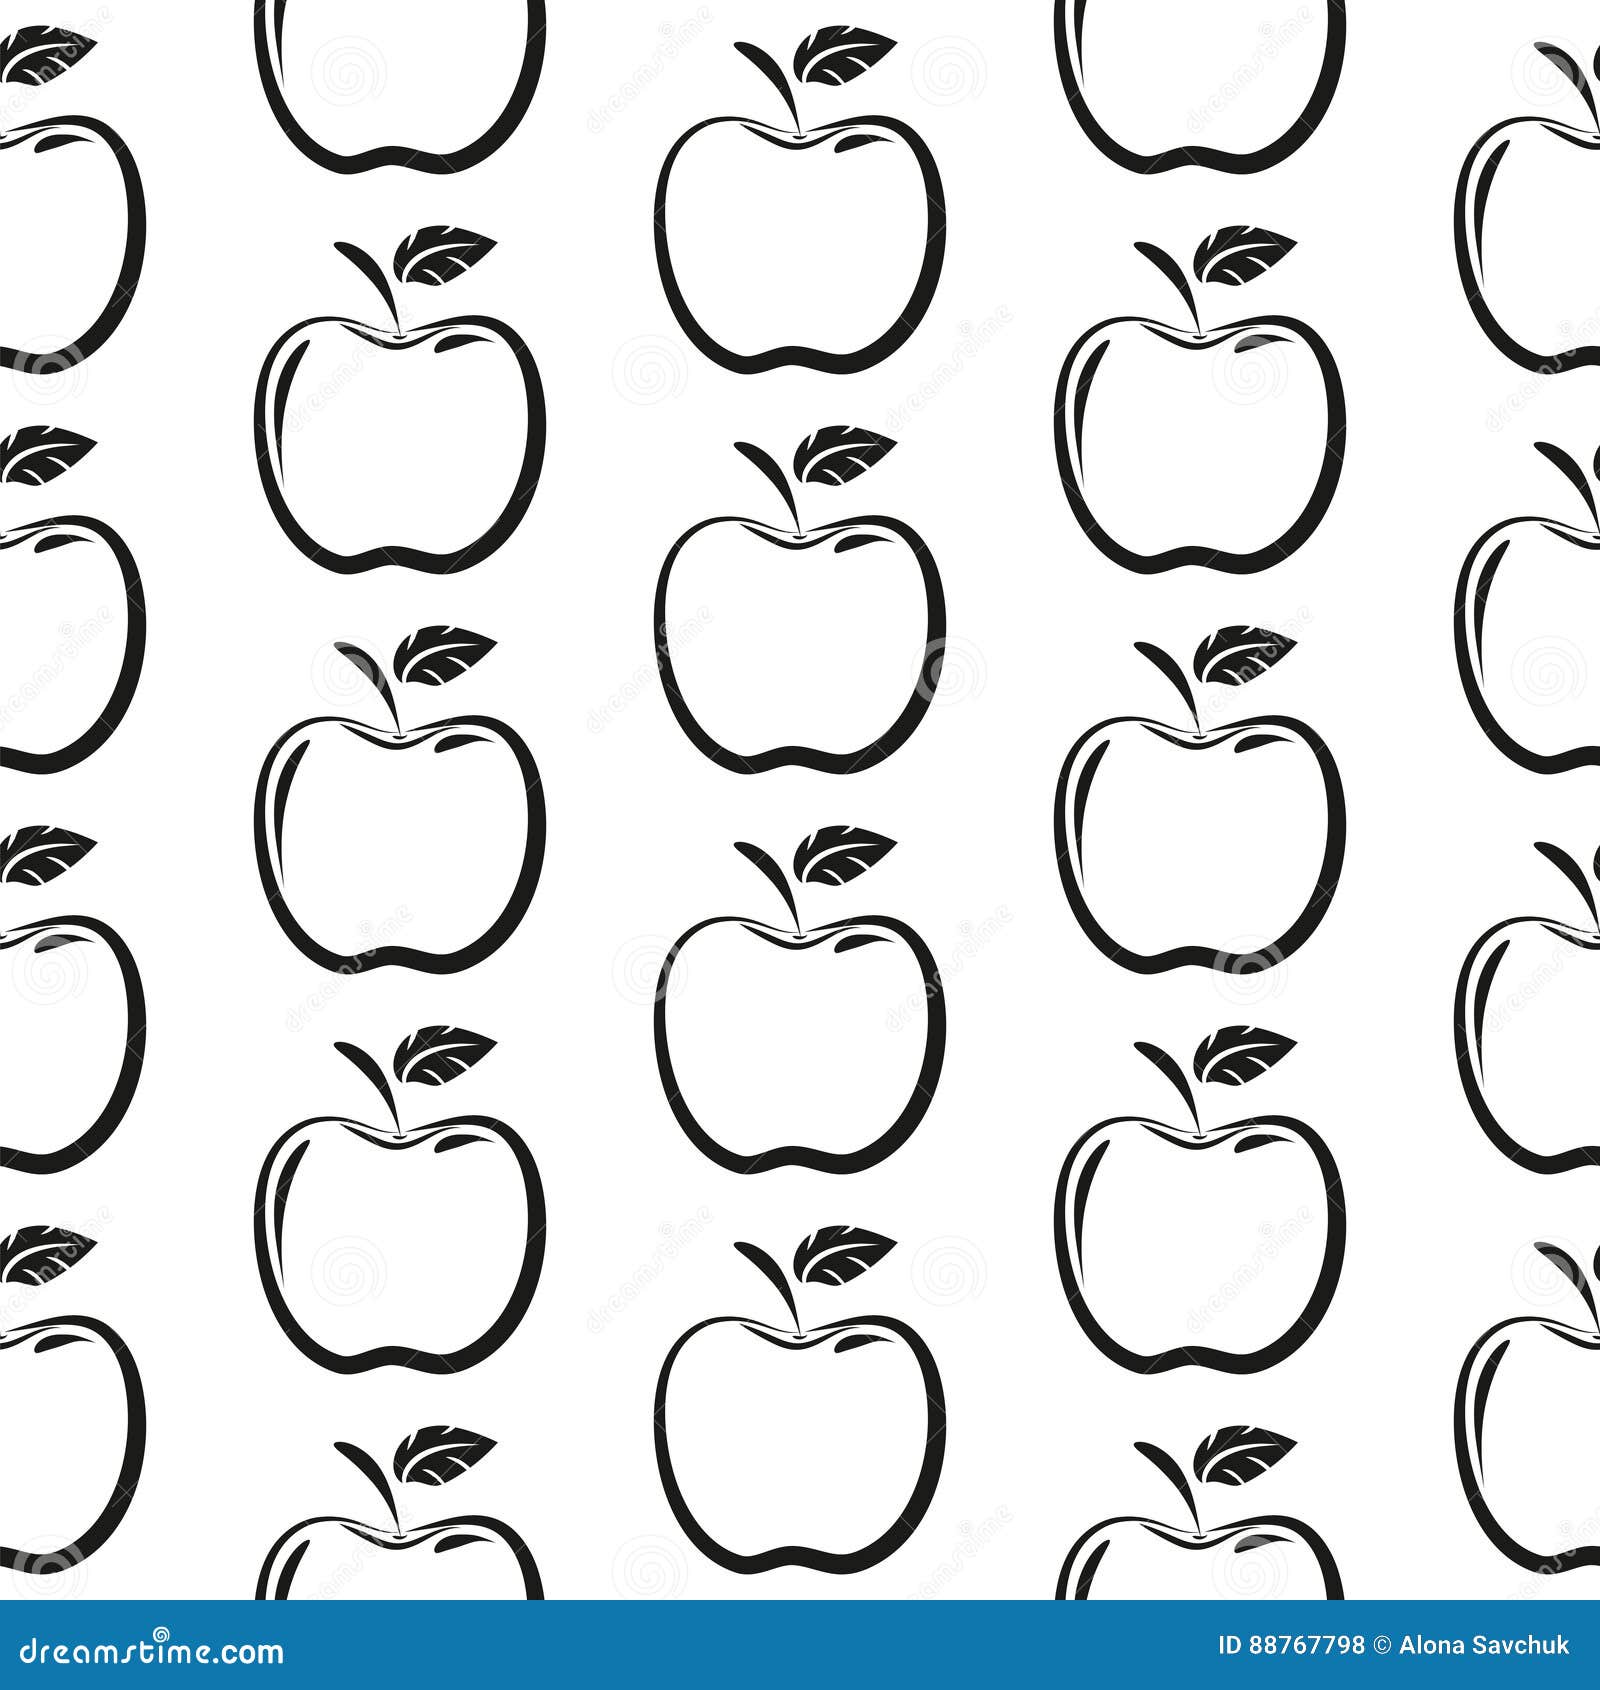 Black And White Hand Drawn Apple Seamless Pattern Stock ...